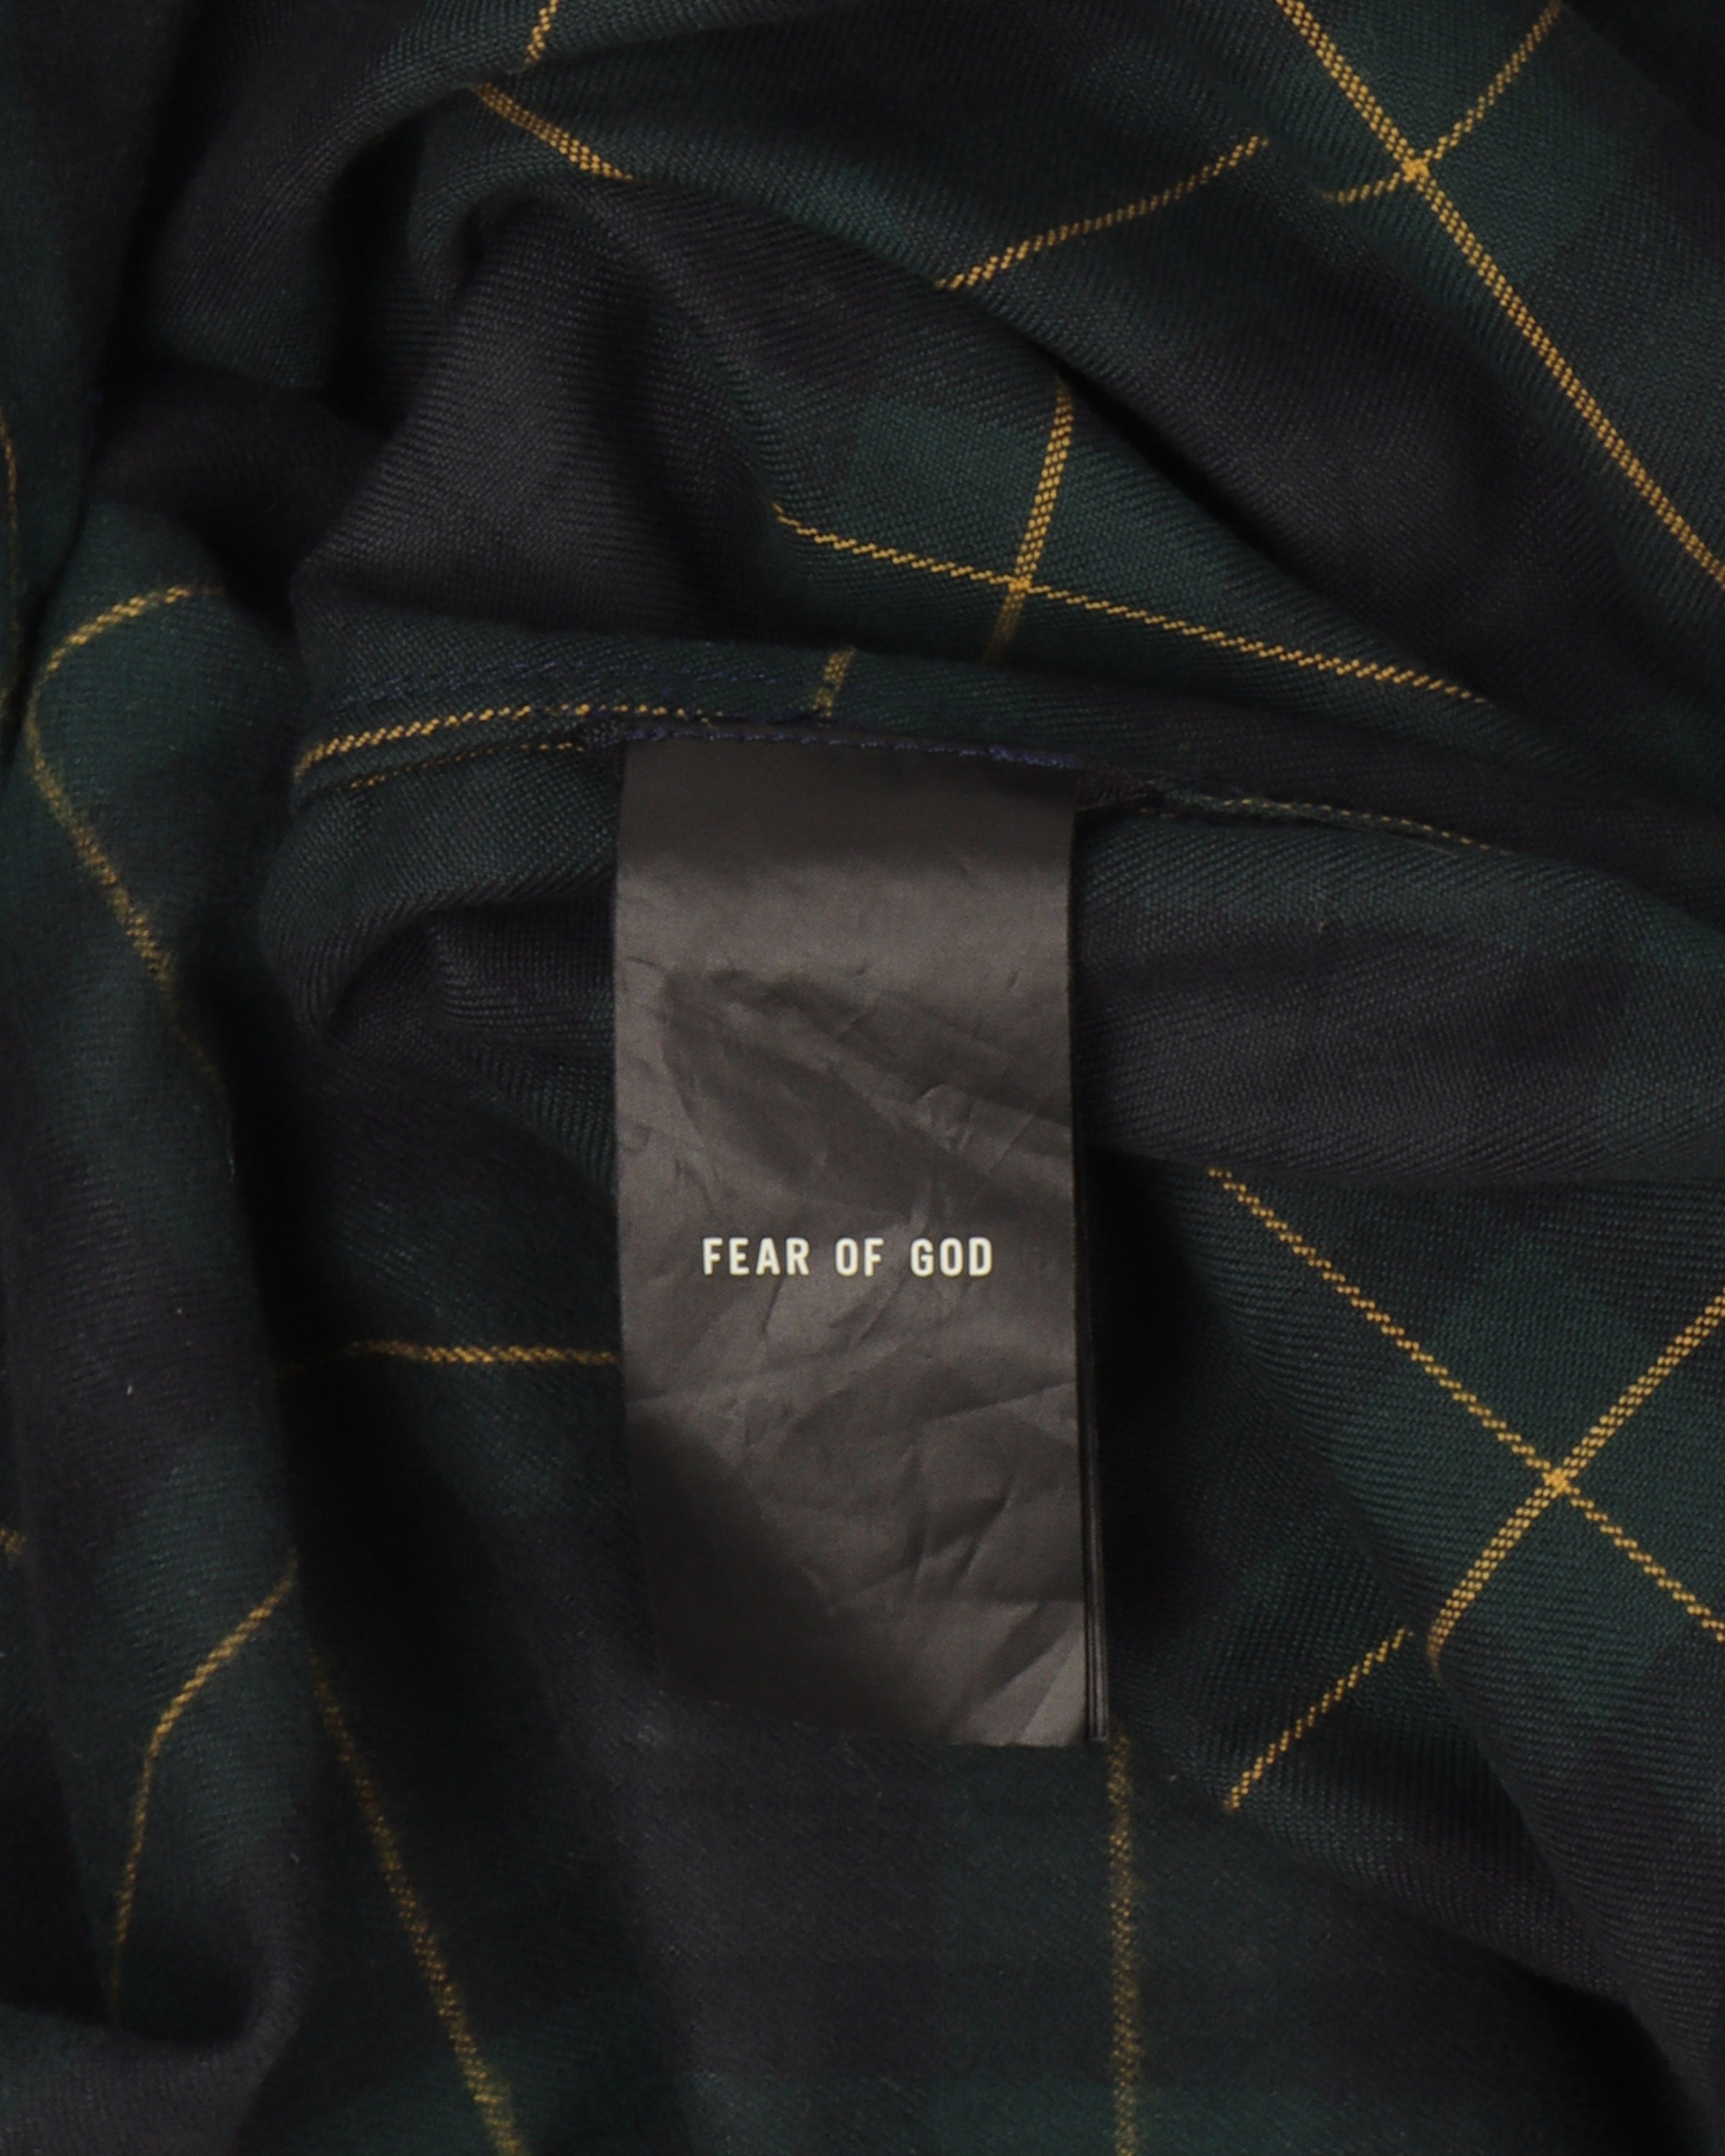 Sixth Collection Flannel